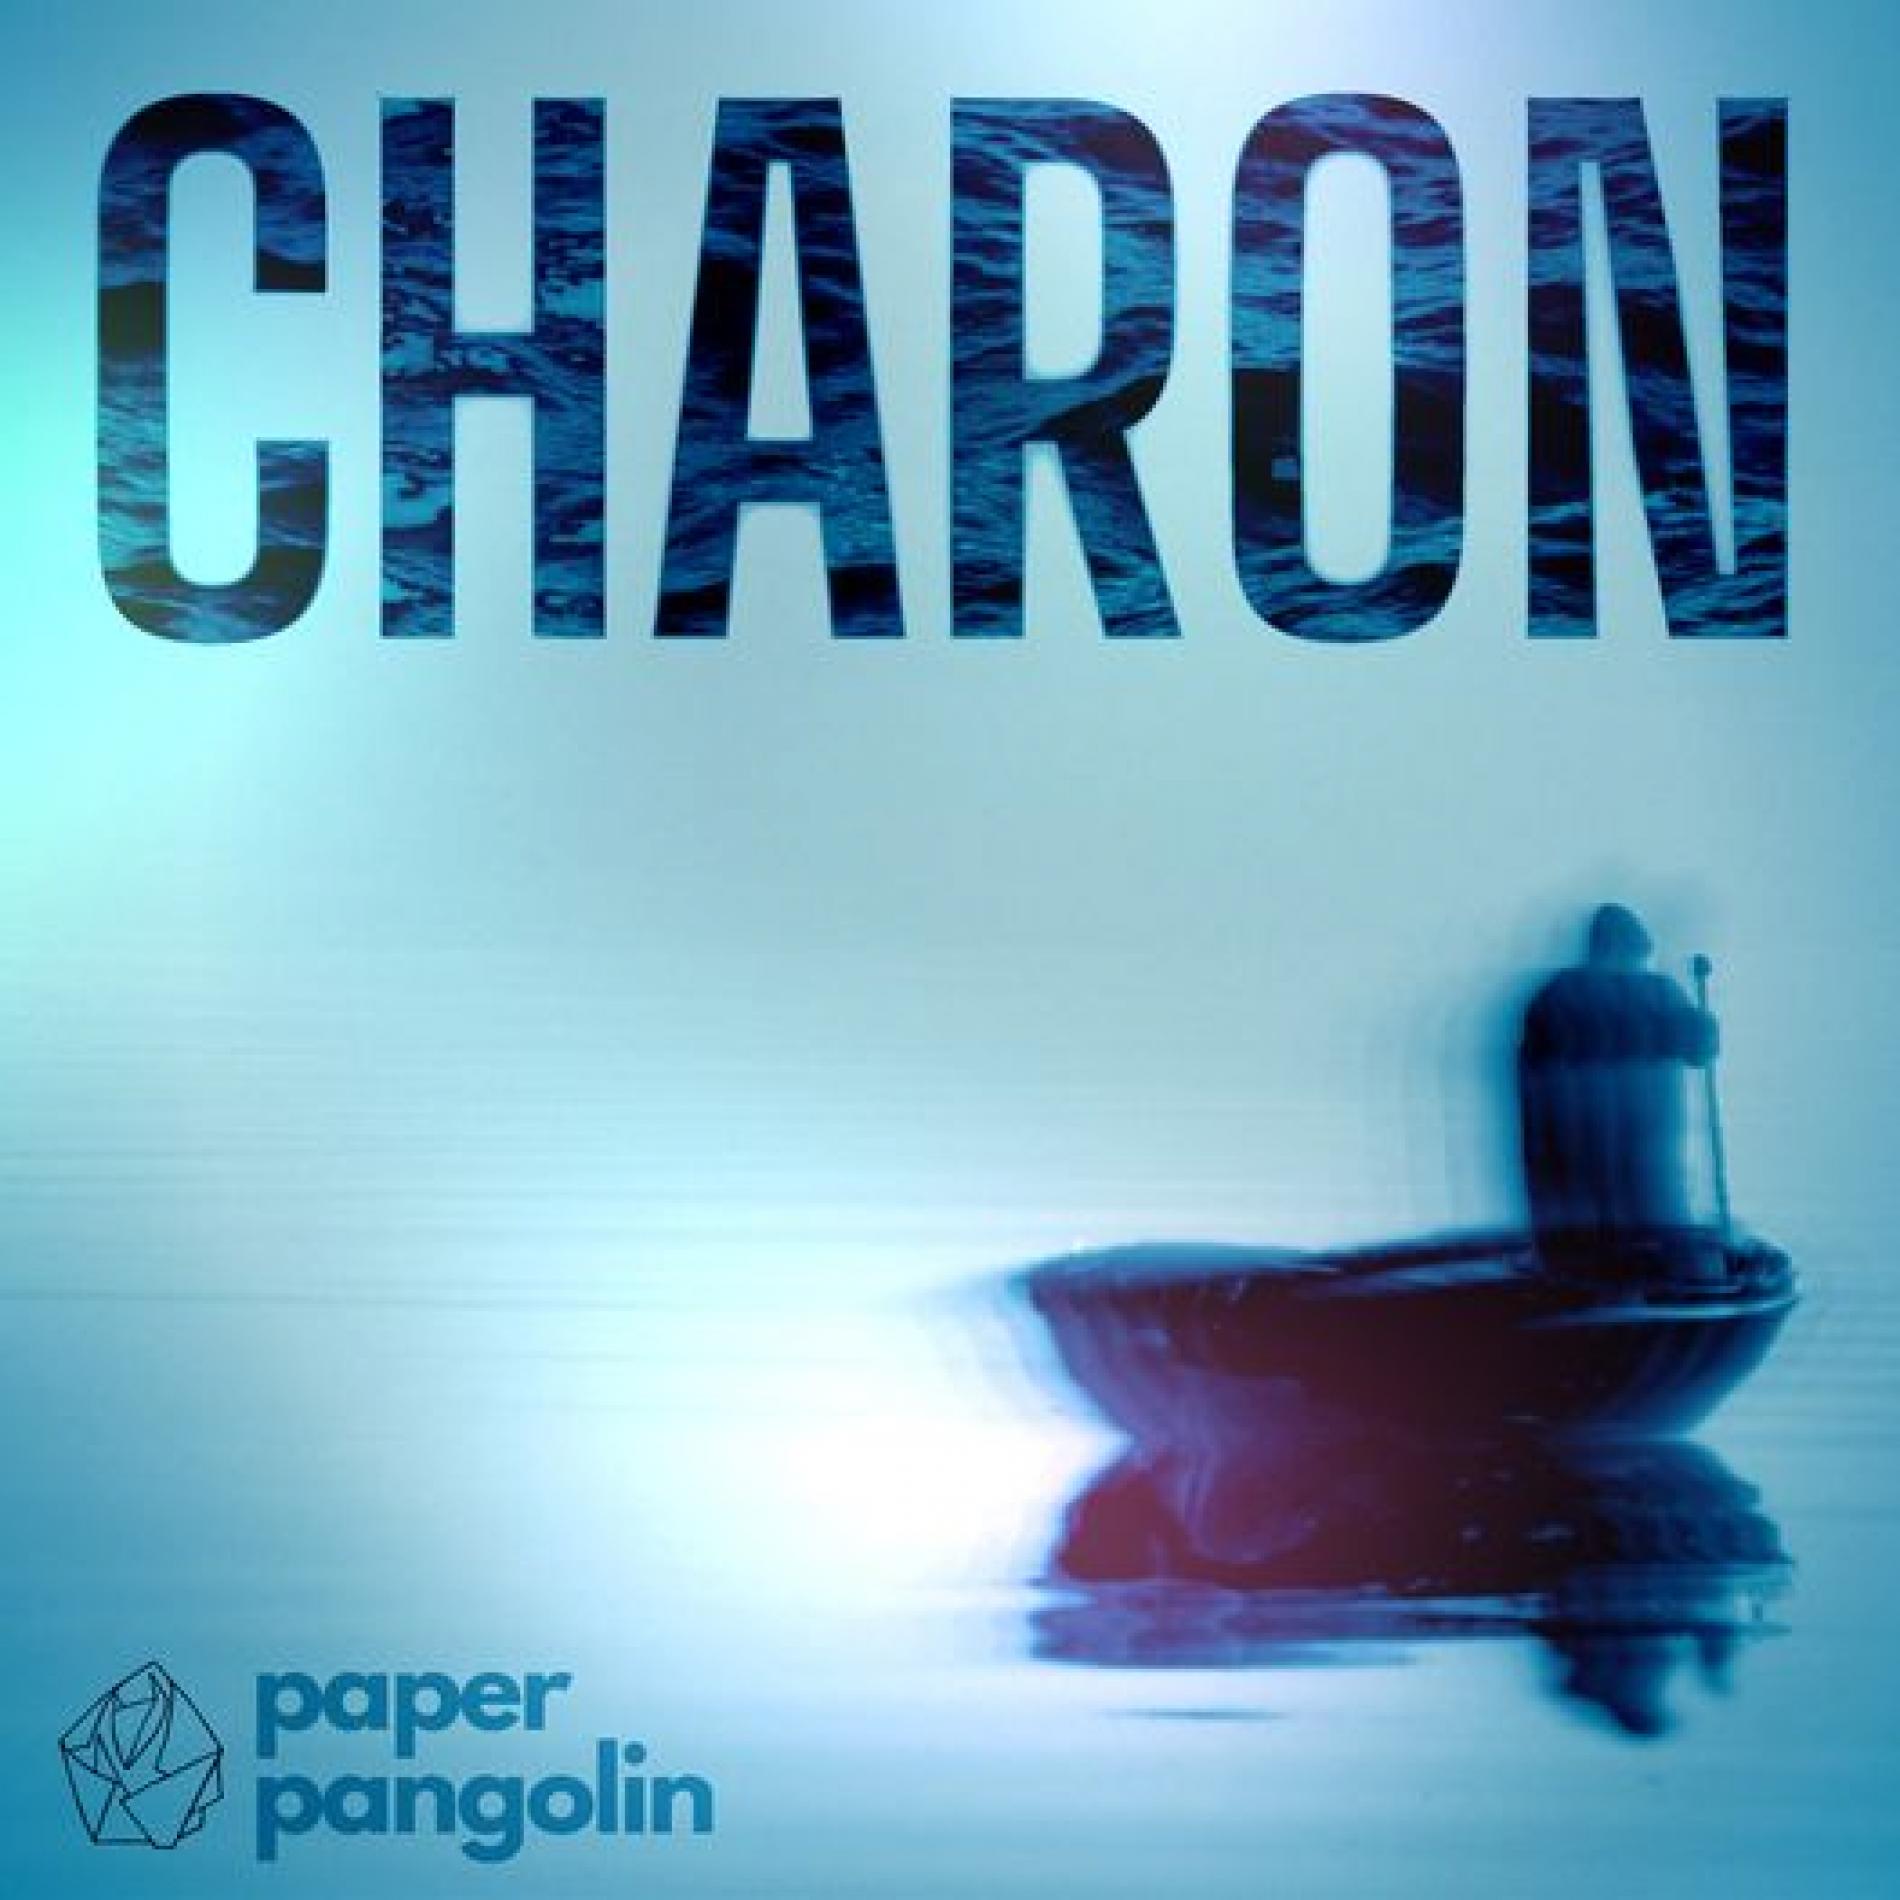 New Music : Charon – paper pangolin (Official Audio)